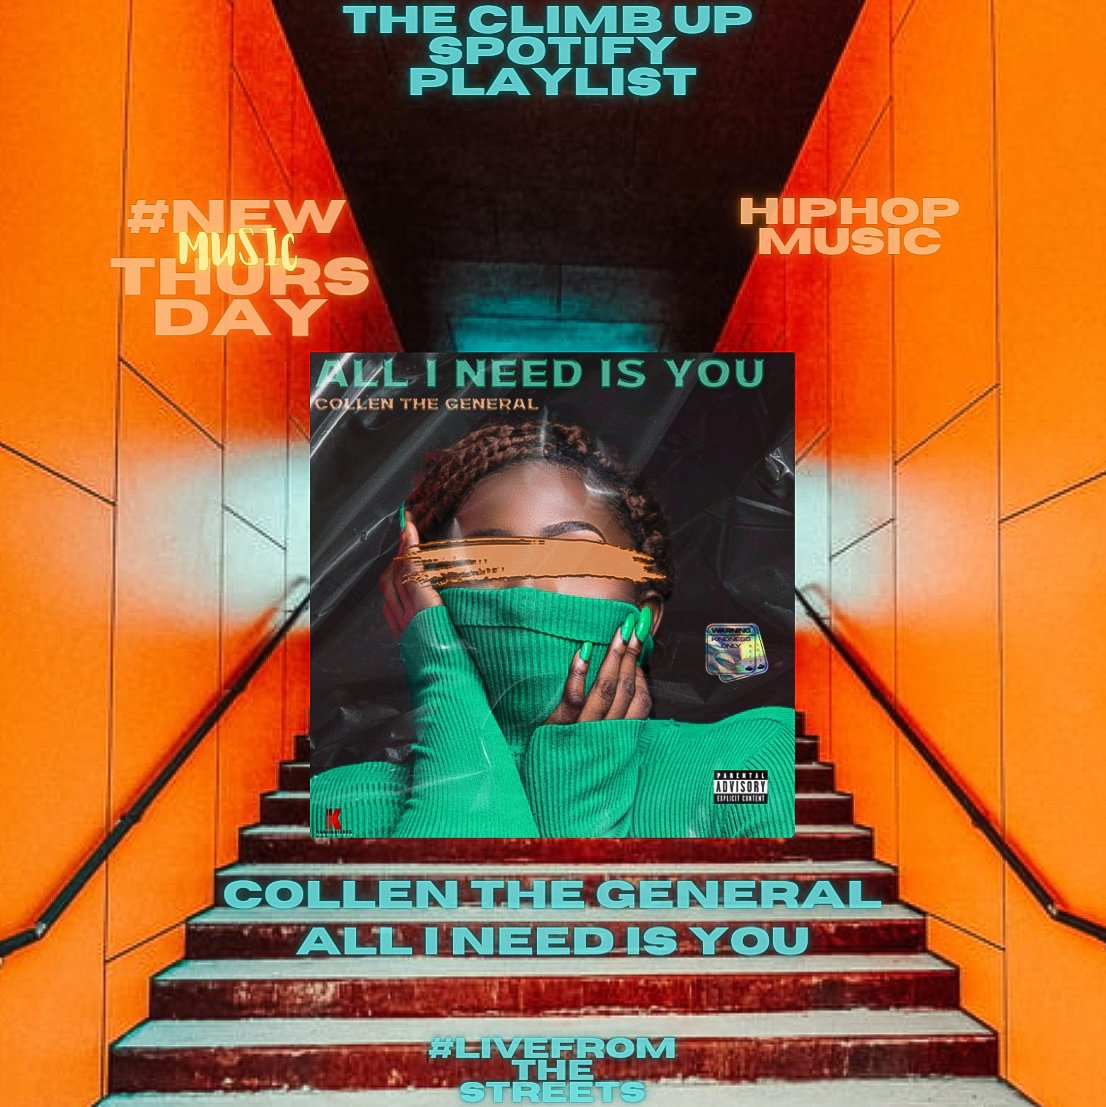 1. Told you so- @IzzyLucid

2. Burnt Bridges- @TashaHendrixx , Oriiginelle

3. Monalisa- @toshkithatboy

4. June 13th- @CarvoCardo

5. All I need is You- @collenthegeneral

Let's welcome these amazing CLIMBERS by streaming the HipHop out of this playlist.💙🧗🏽🎧🎶😉👏🏾